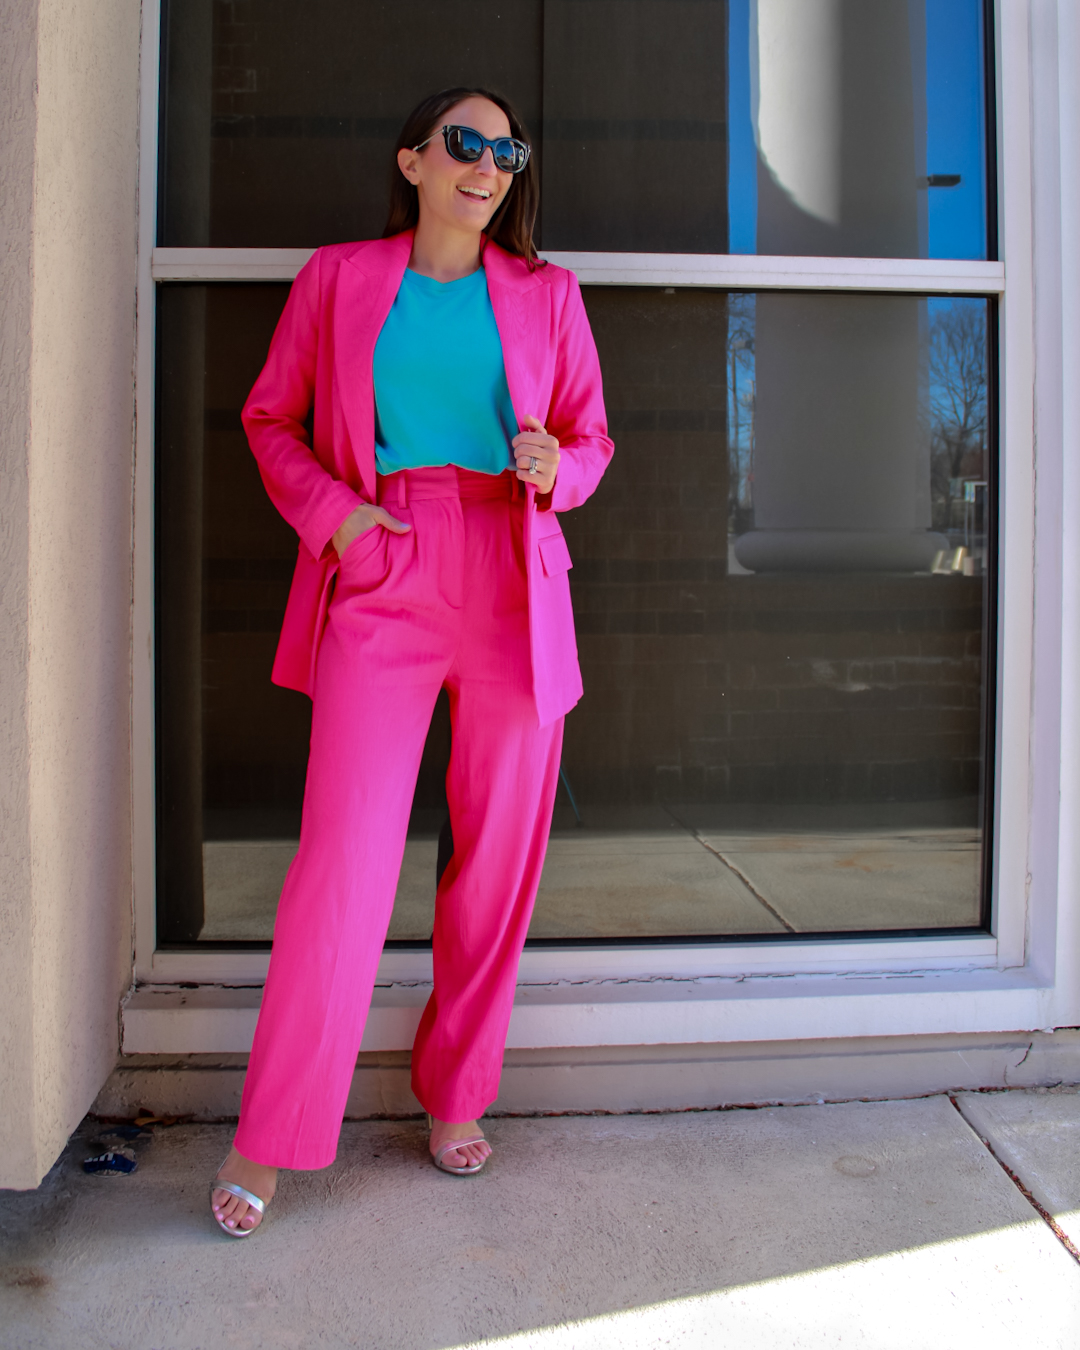 https://sideofsequins.com/wp-content/uploads/2021/04/Pink-Suit-and-Blue-tshirt.jpg